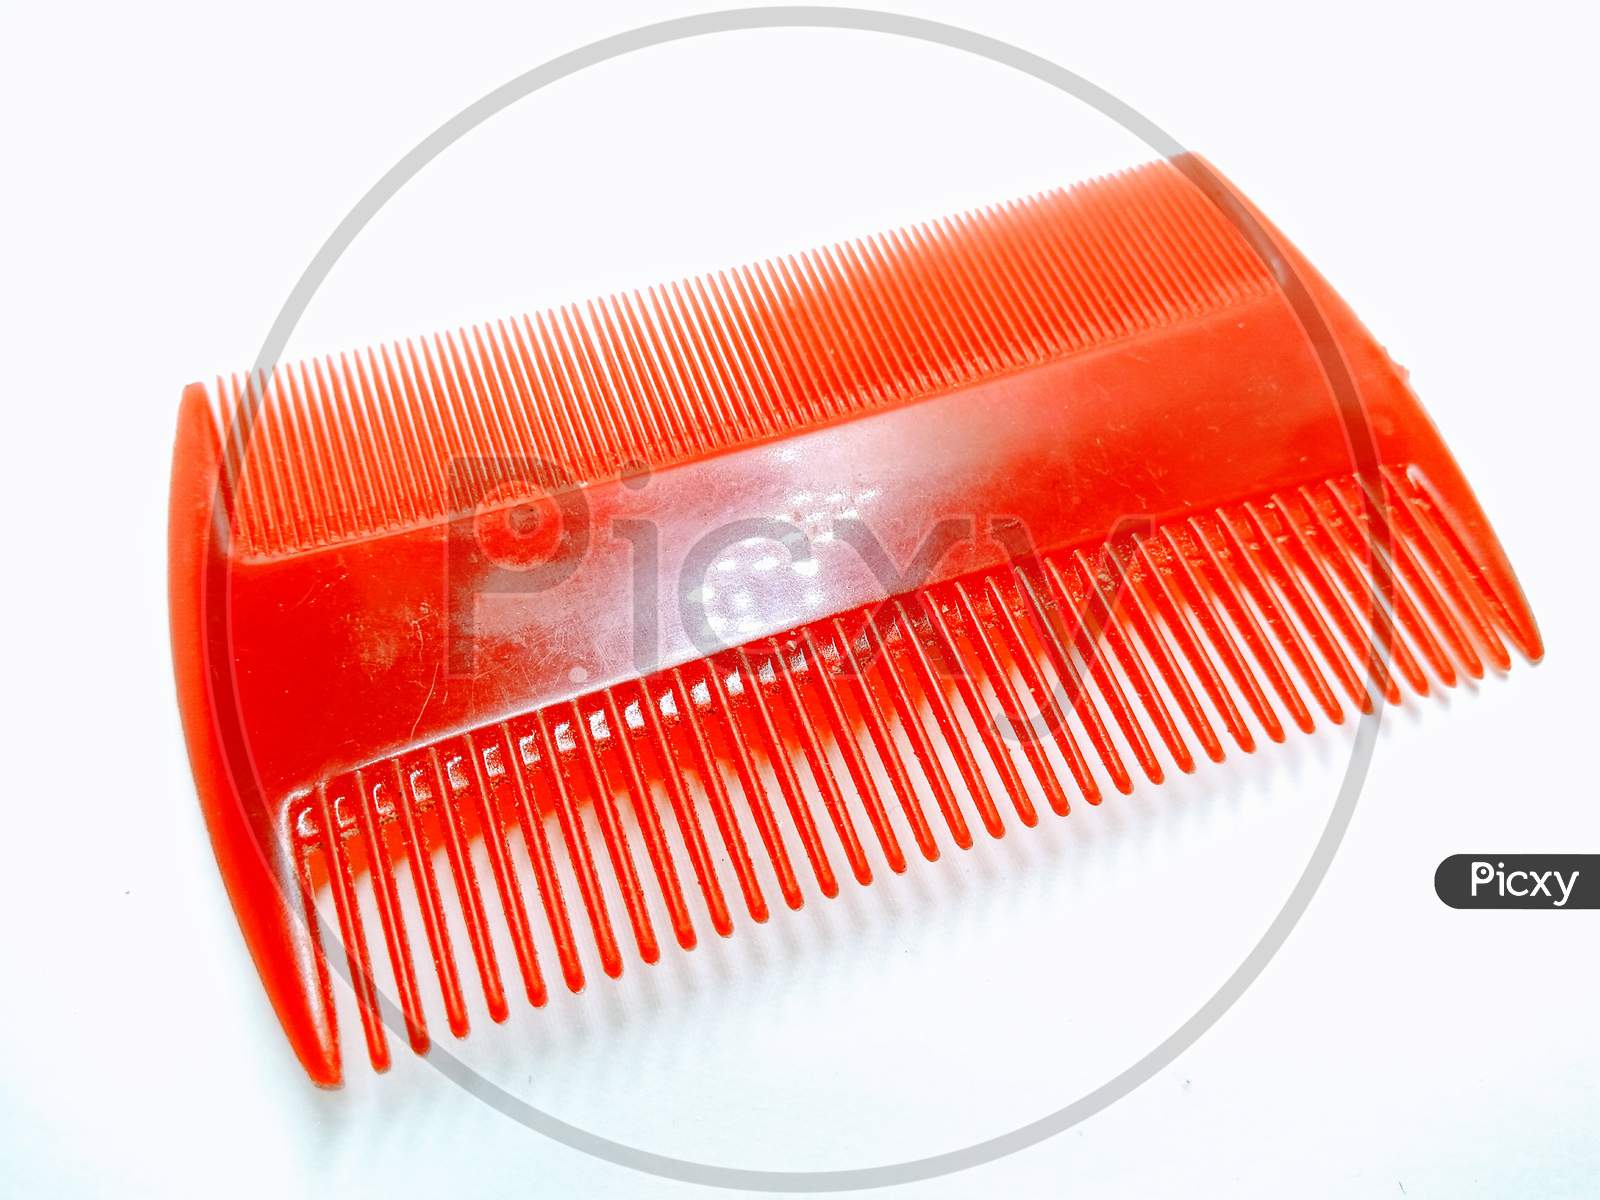 Plastic Comb Over an Isolated White Background